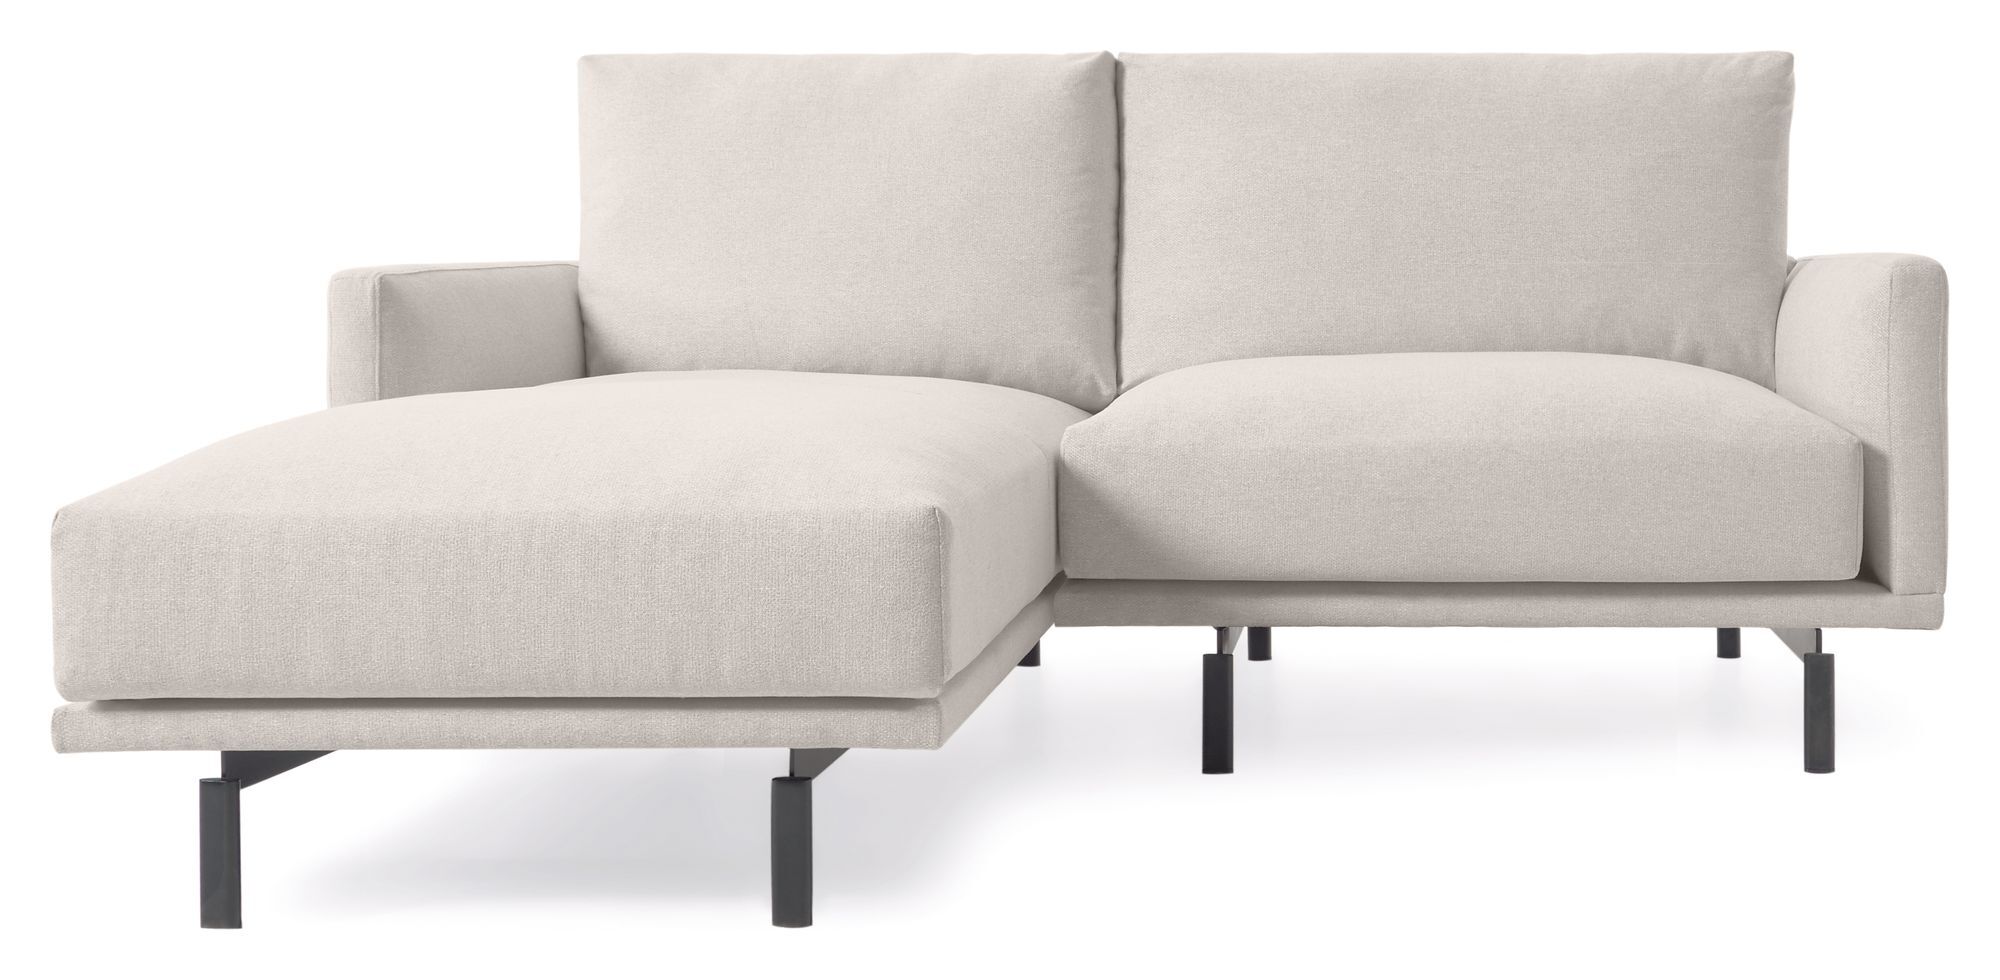 Kave Home Galene 3-pers. Sofa m. venstrevendt chaiselong, B214, Beige chenille   Unoliving